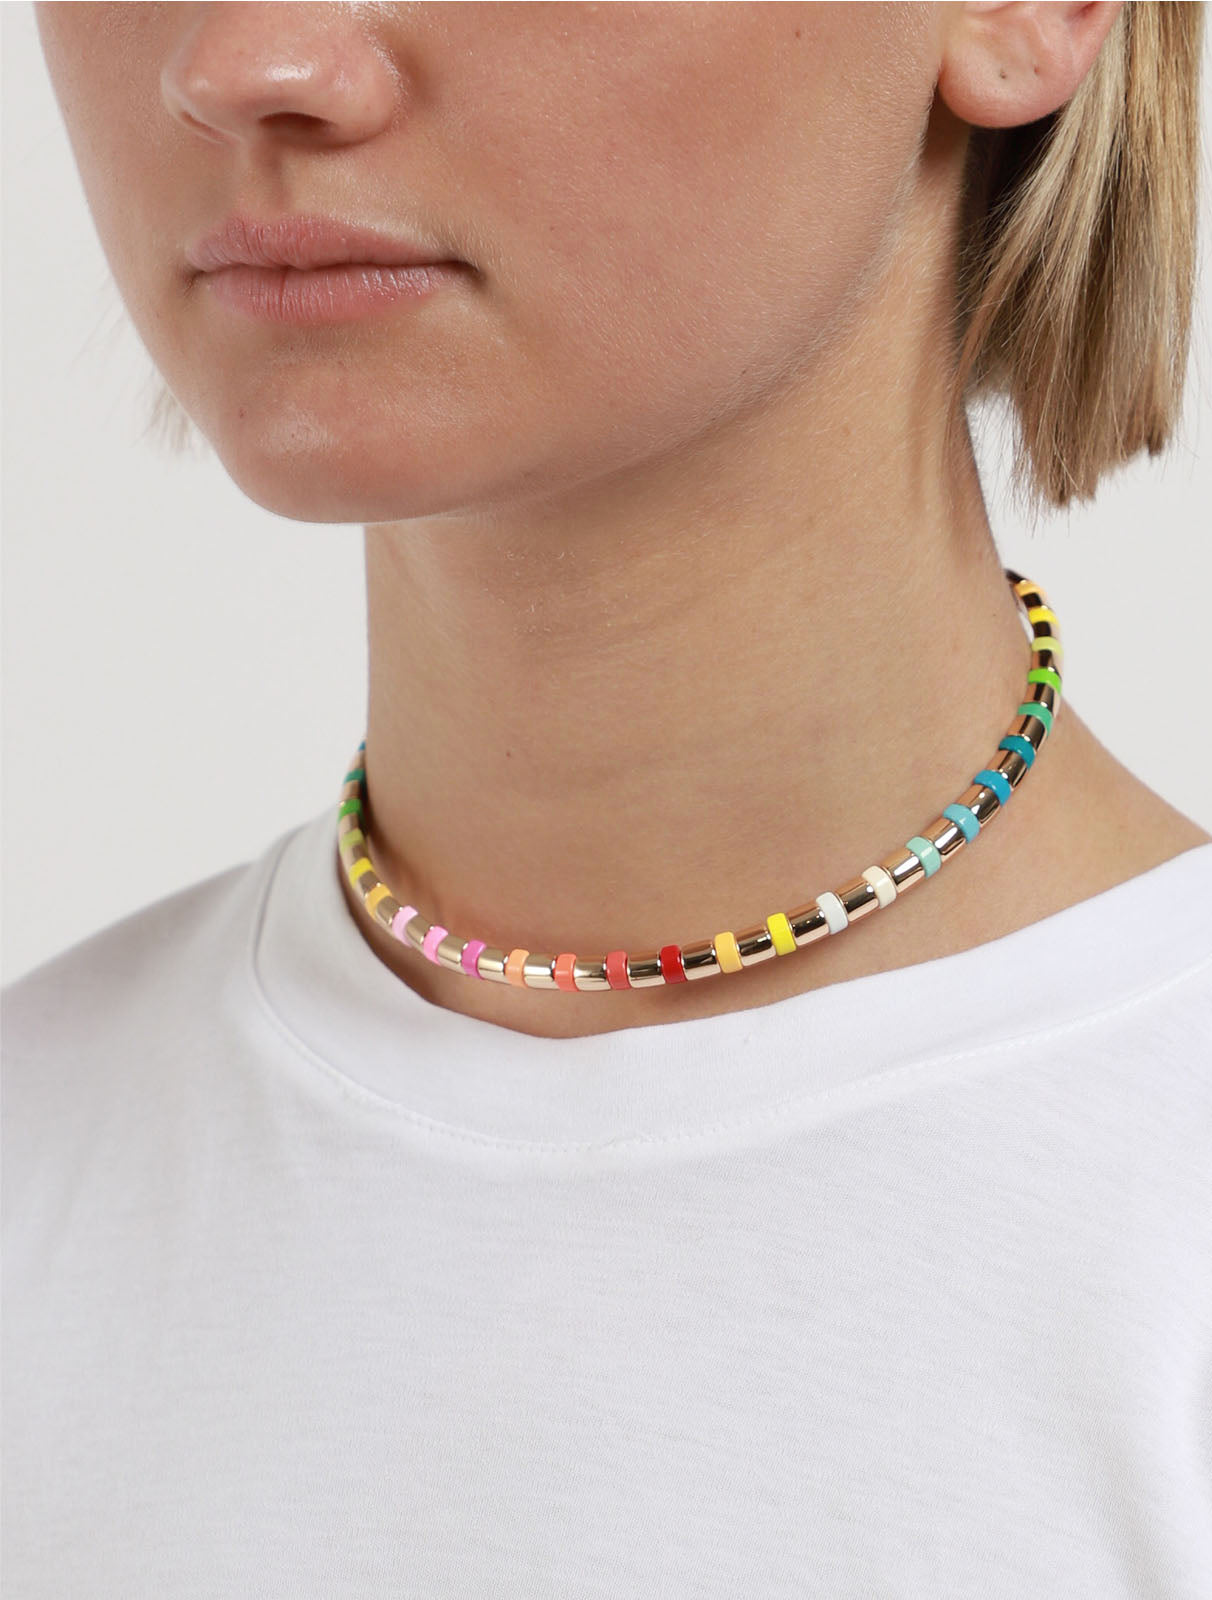 Not Just Another Rainbow Brite Choker